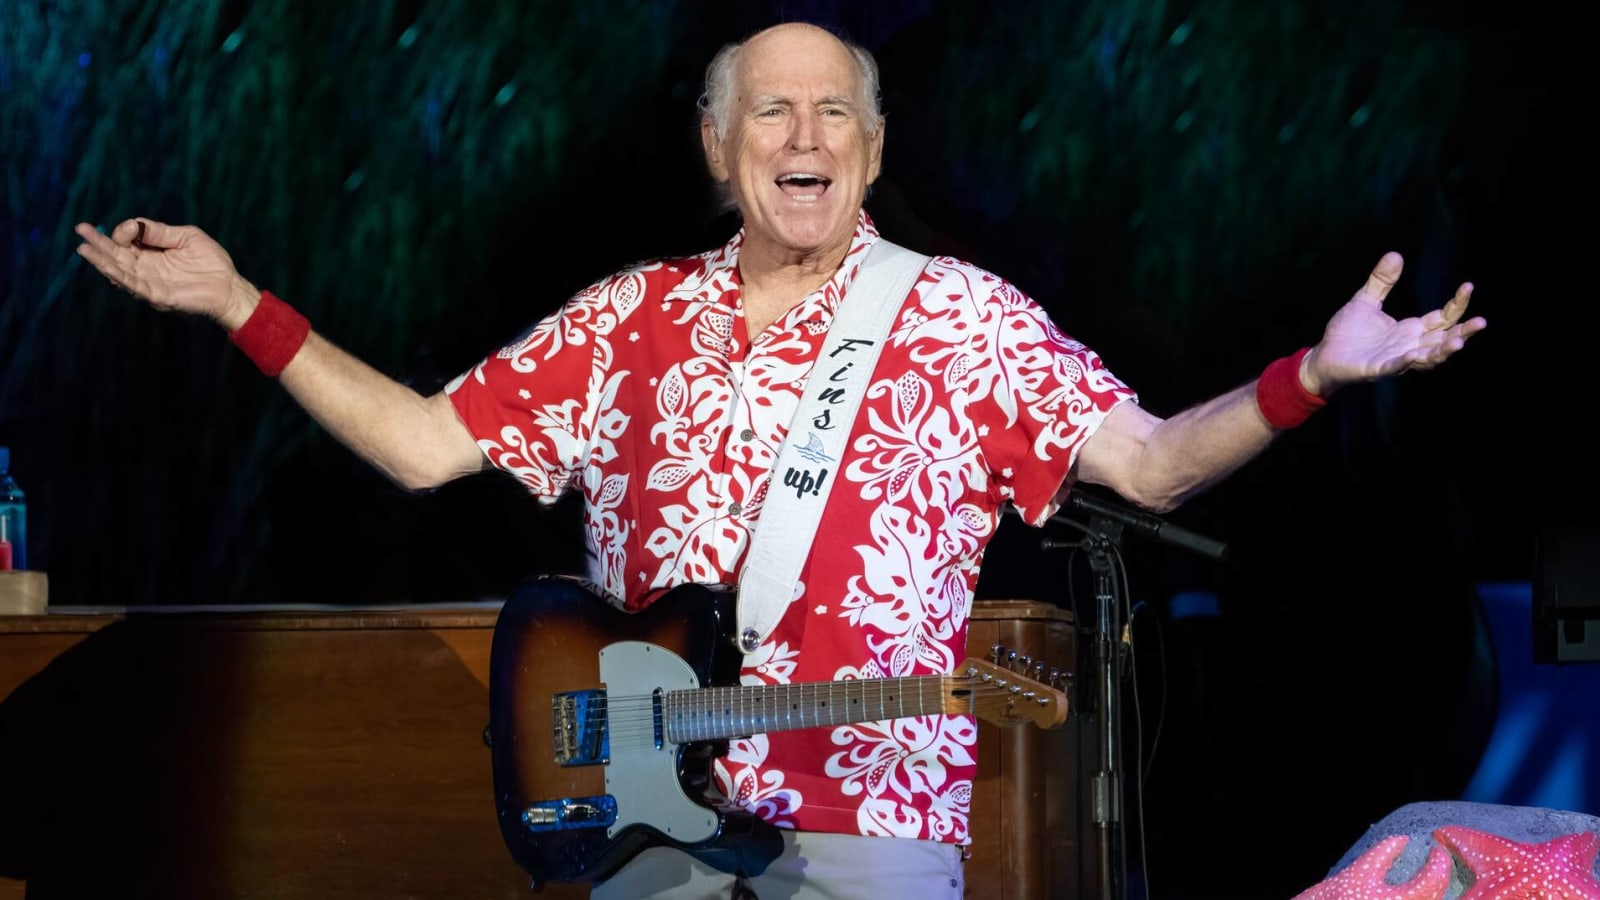 Remembering when Jimmy Buffett was kicked out of a Miami Heat game